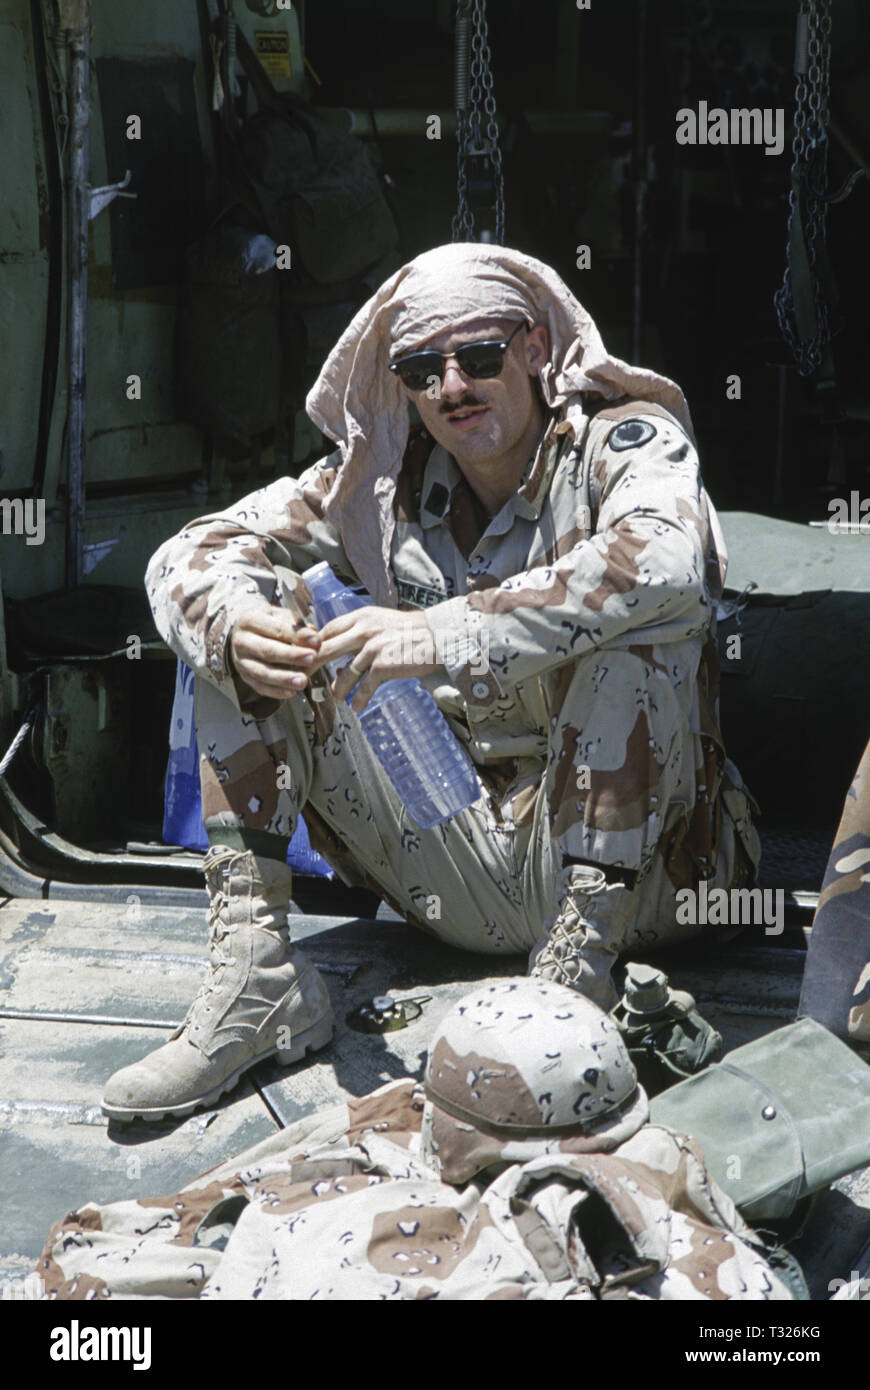 30th October 1993 A U.S. Army soldier of the 24th Infantry Division, named Street, sits at the rear of his M113A3 ambulance (a variant of a United Defense M113 APC). He has just arrived by ship in Mogadishu's new port in Somalia. Stock Photo